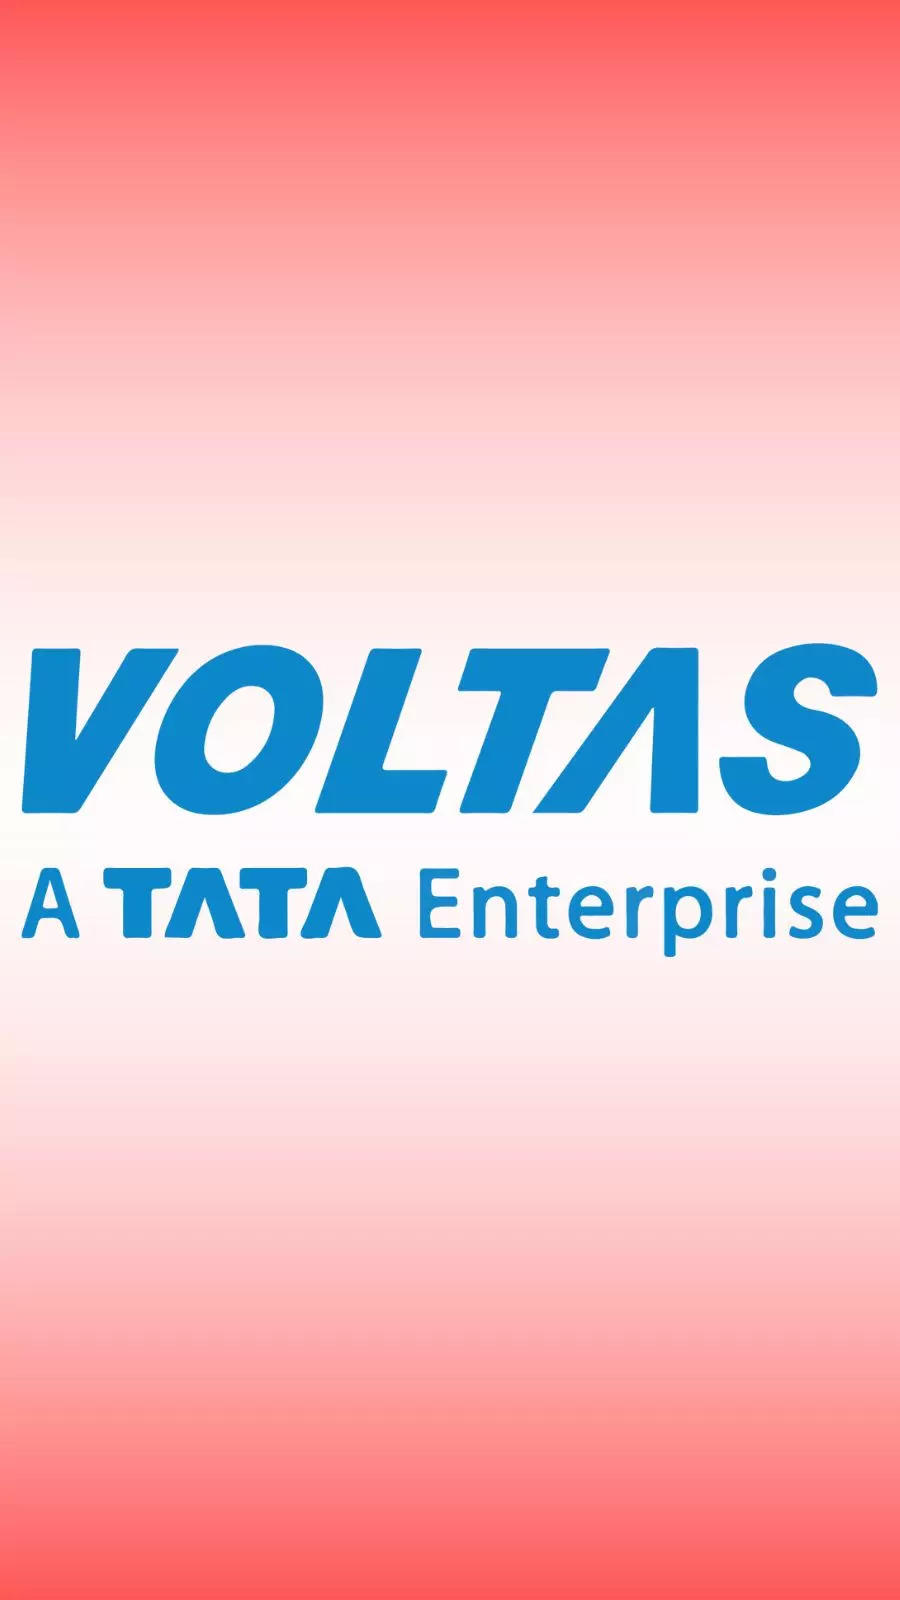 Download Voltas Limited Logo Vector EPS, SVG, PDF, Ai, CDR, and PNG Free,  size 402.97 KB